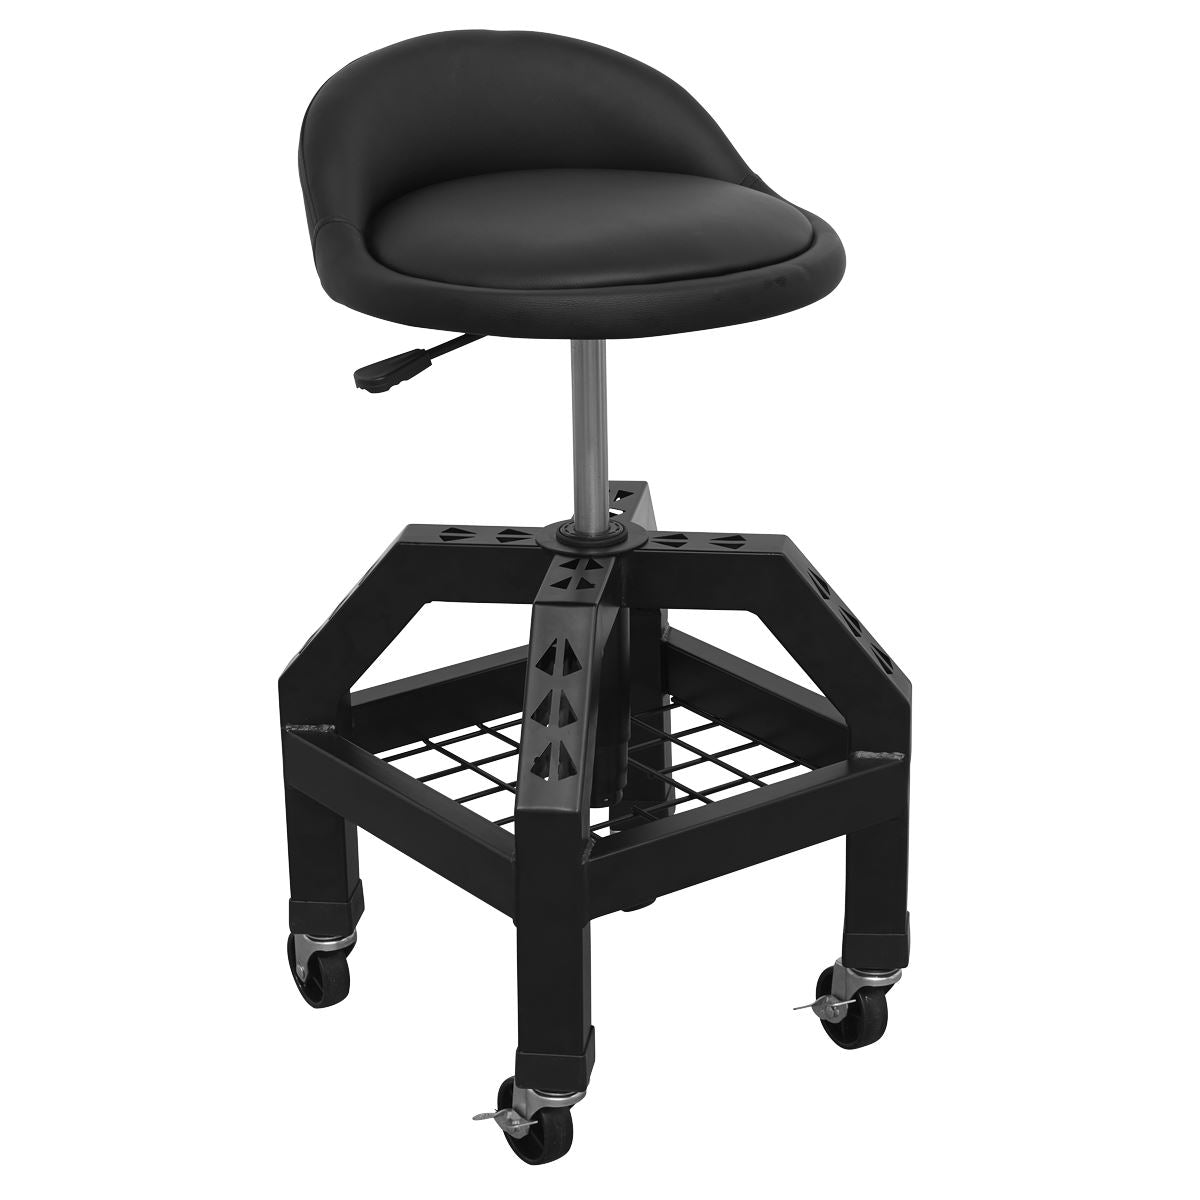 Sealey Premier Industrial Premier Industrial Pneumatic Creeper Stool with Adjustable Height Swivel Seat & Back Rest